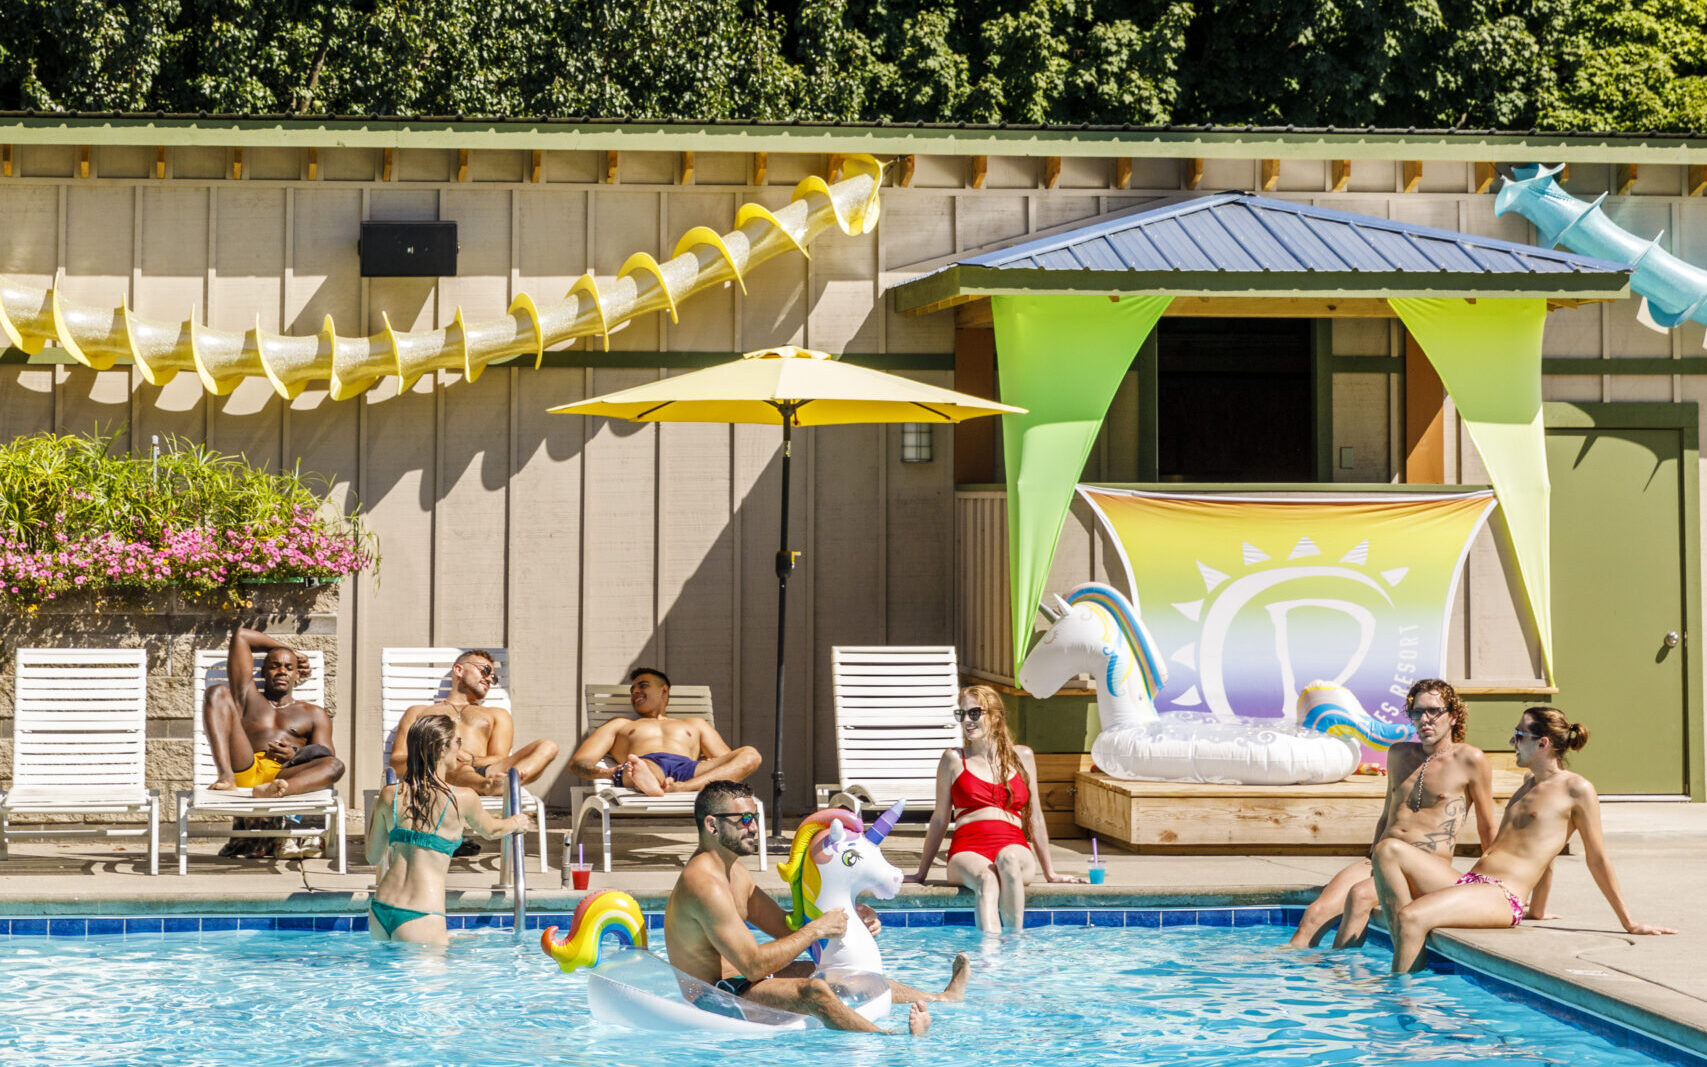 A group of people playing in a pool at The Dunes Resort. Some people are relaxing on the poolside while a man rides a float.